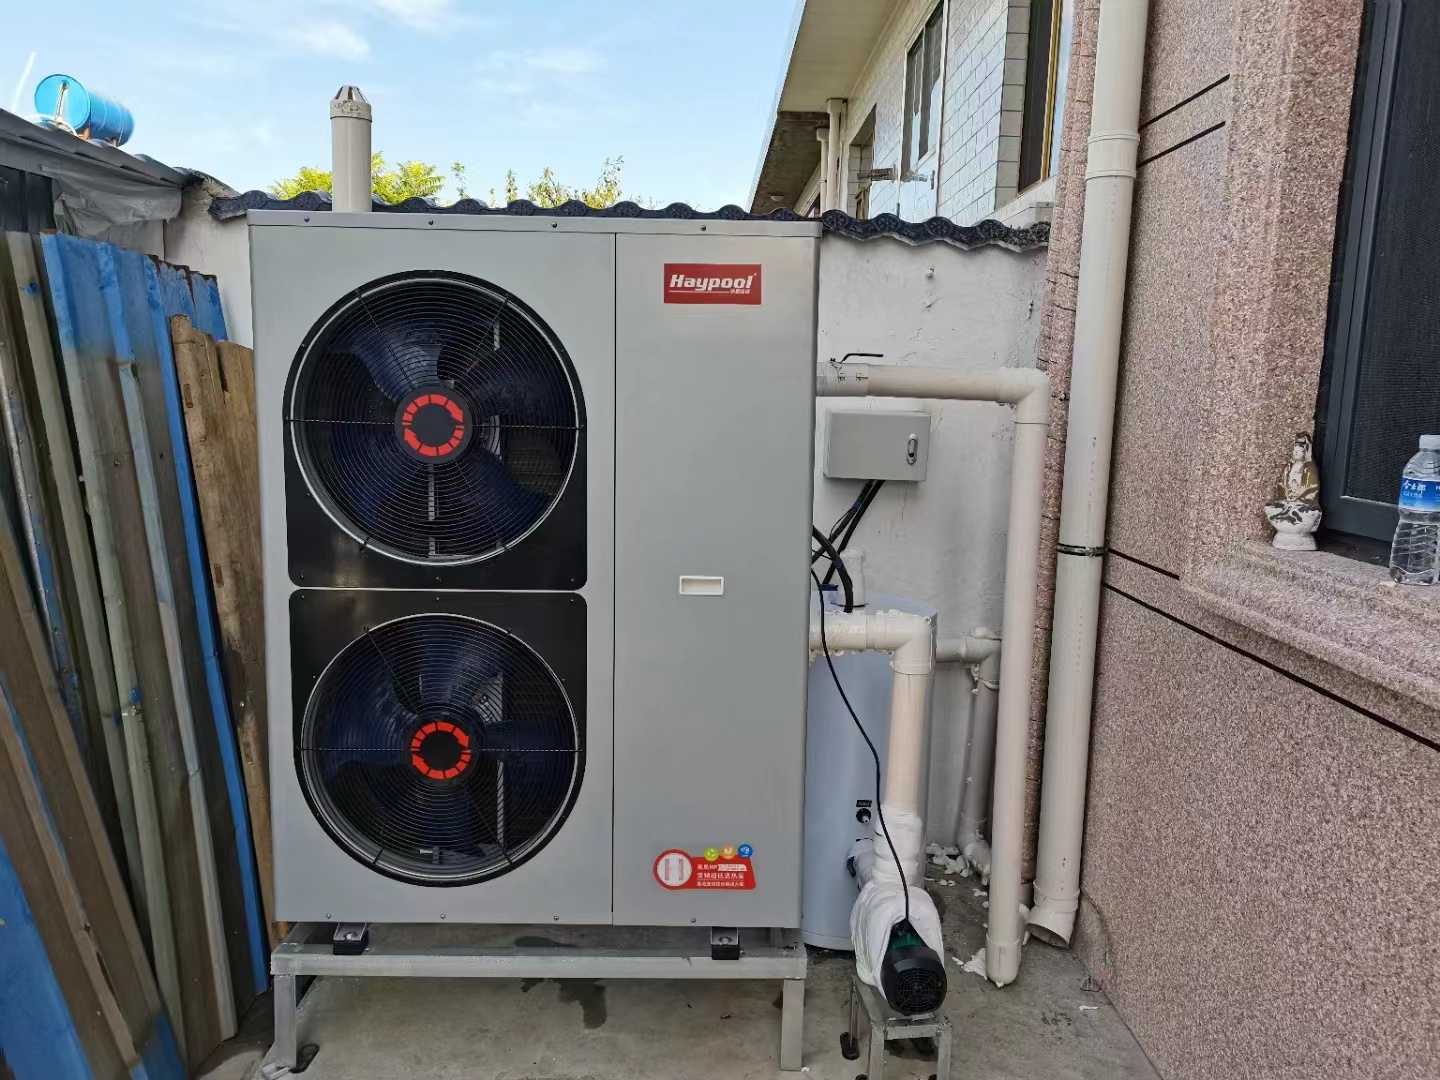 Inverter EVI Heat Pump, featured with cost-effectiveness, can be used in extremely cold area with climate temperature as low as -25℃ for heating/cooling, and domestic hot water.